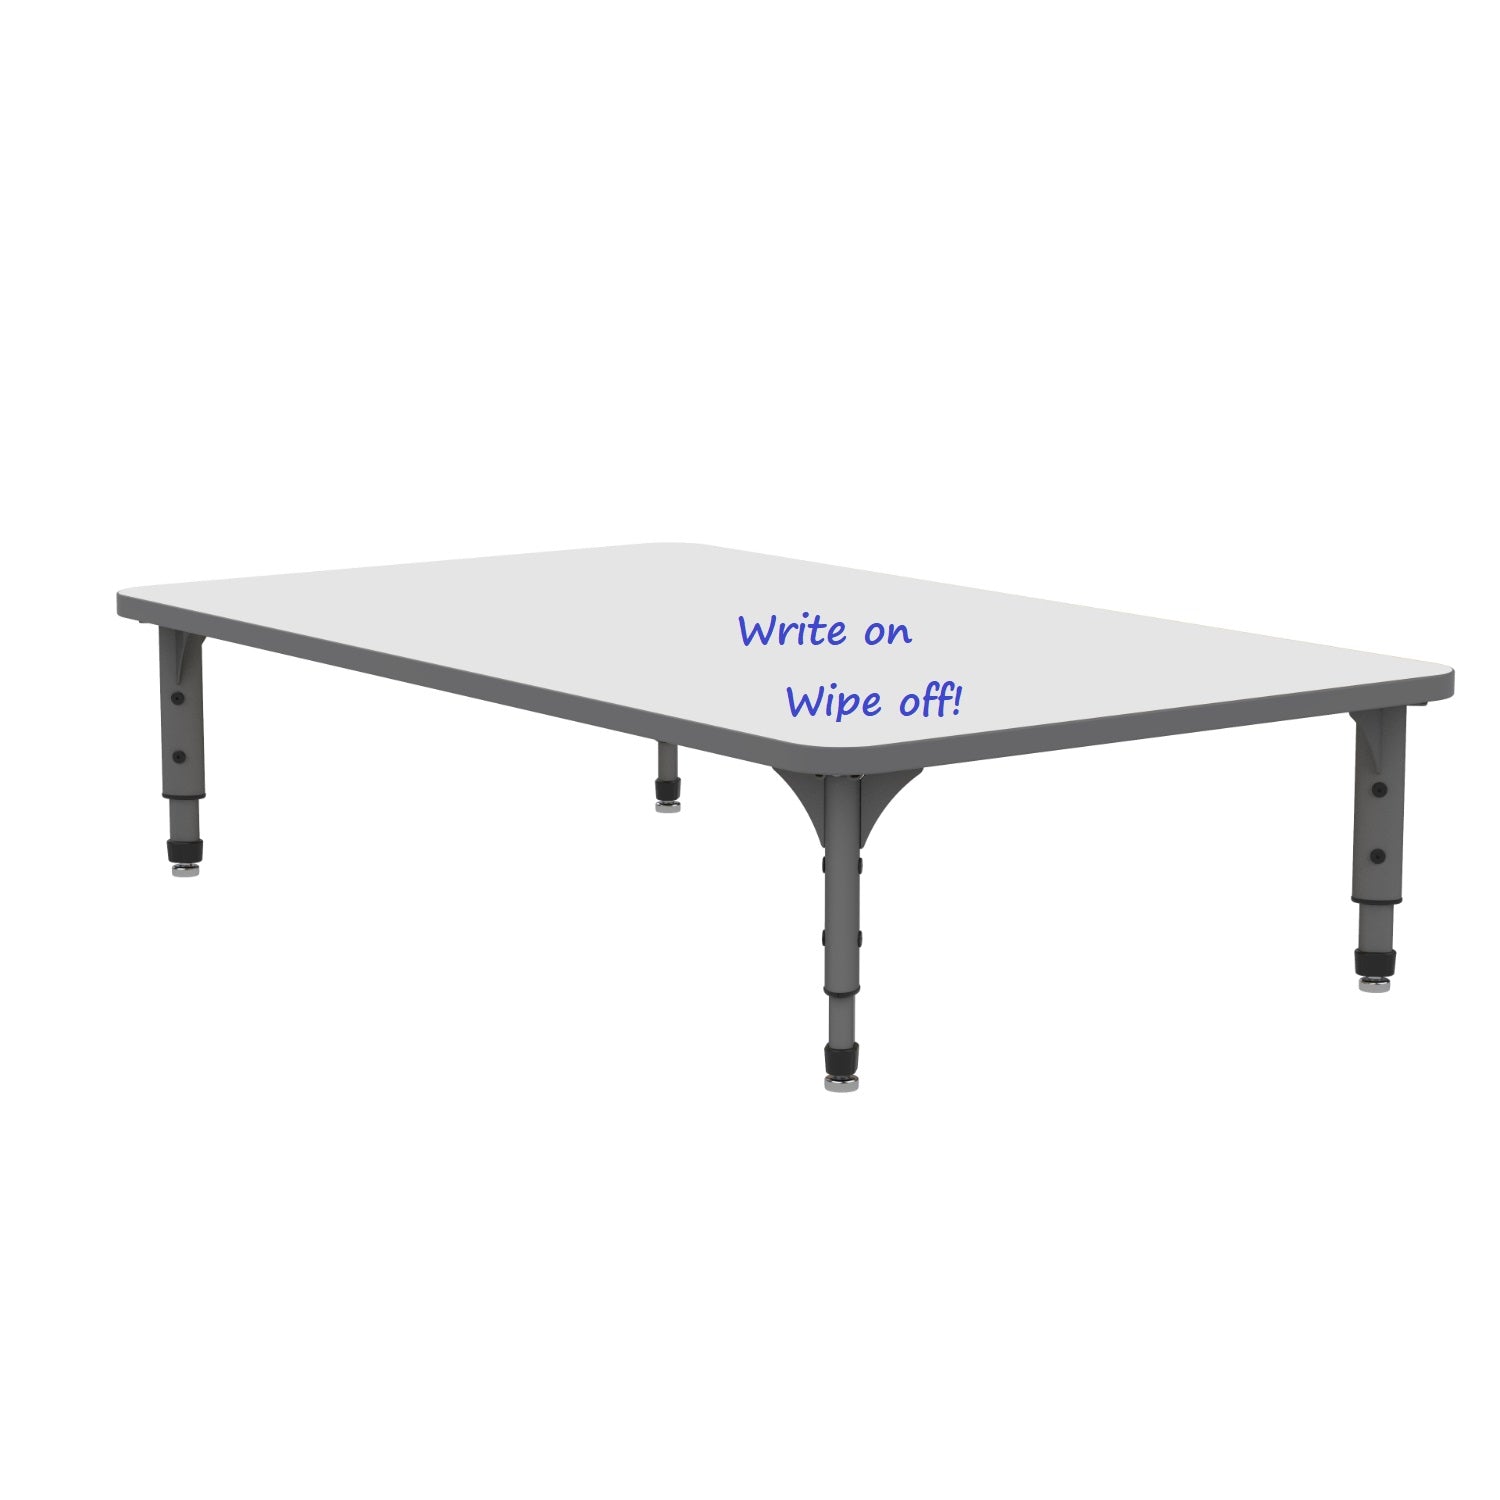 Adjustable Height Floor Activity Table with White Dry-Erase Markerboard Top, 36" x 60" Rectangle